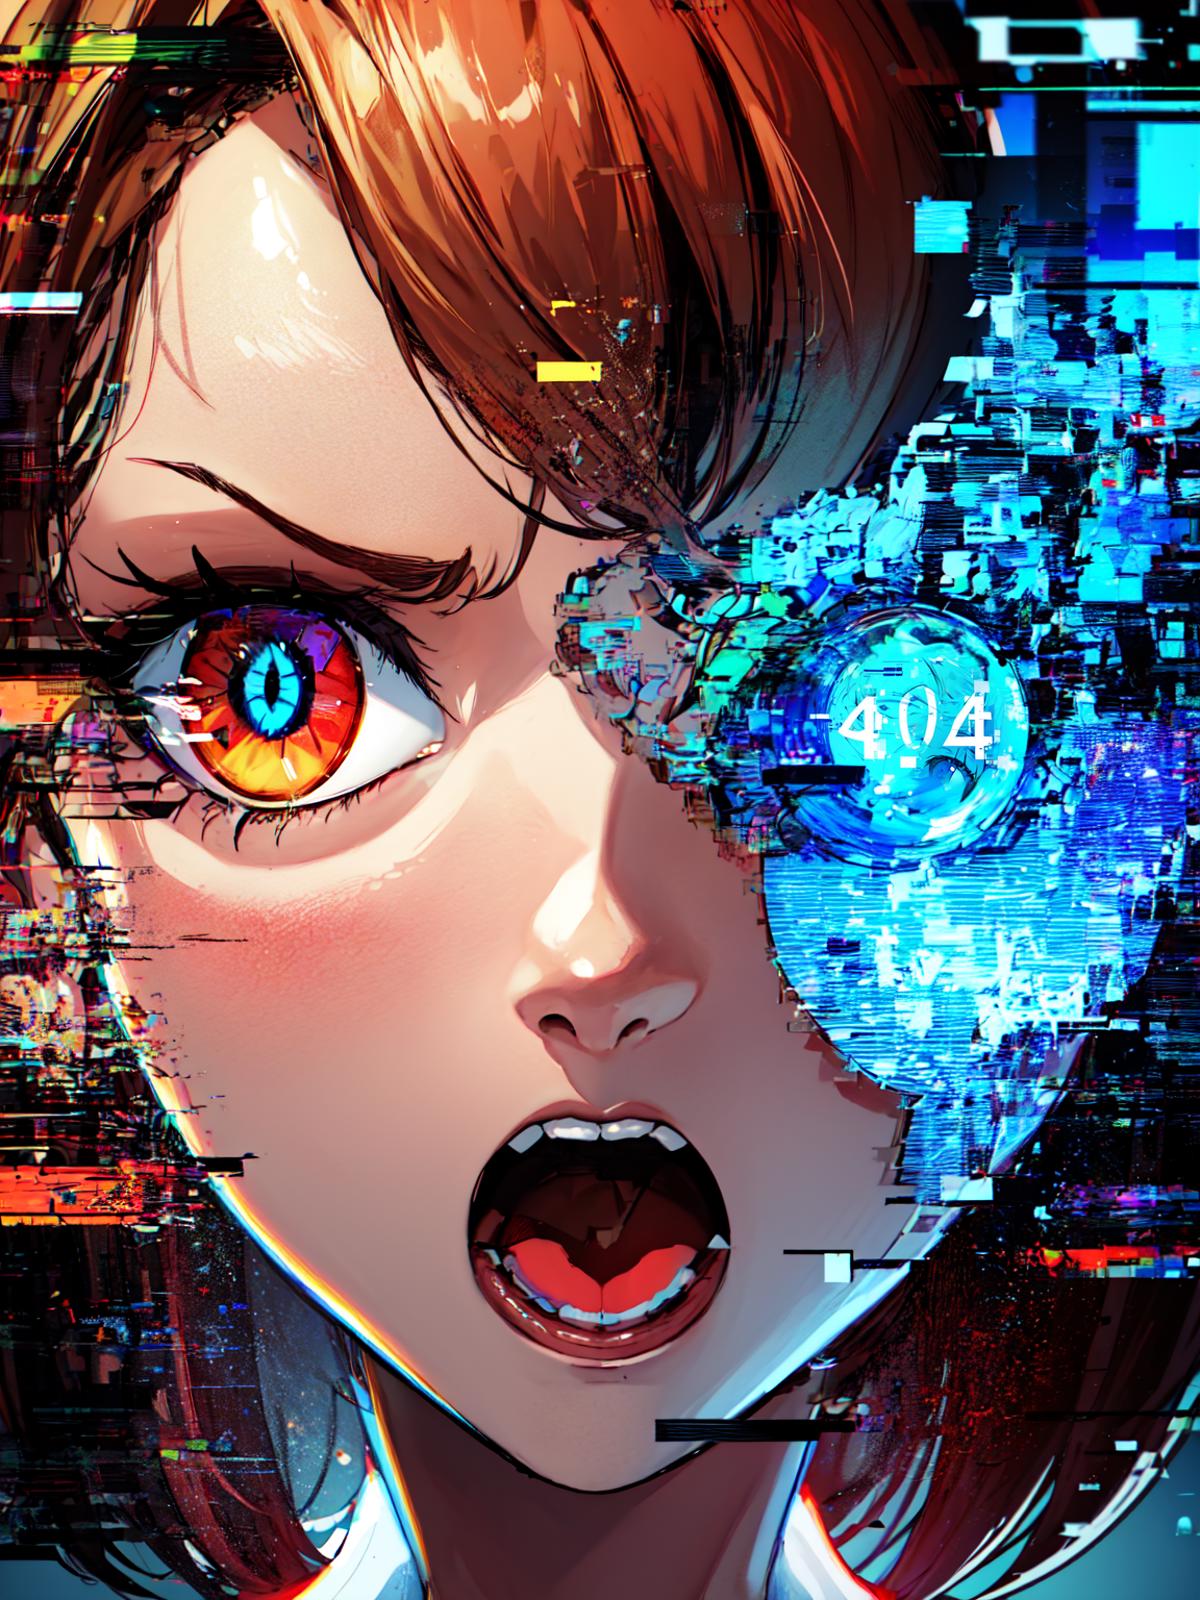 A woman with her mouth open and weird eyes in a futuristic setting.